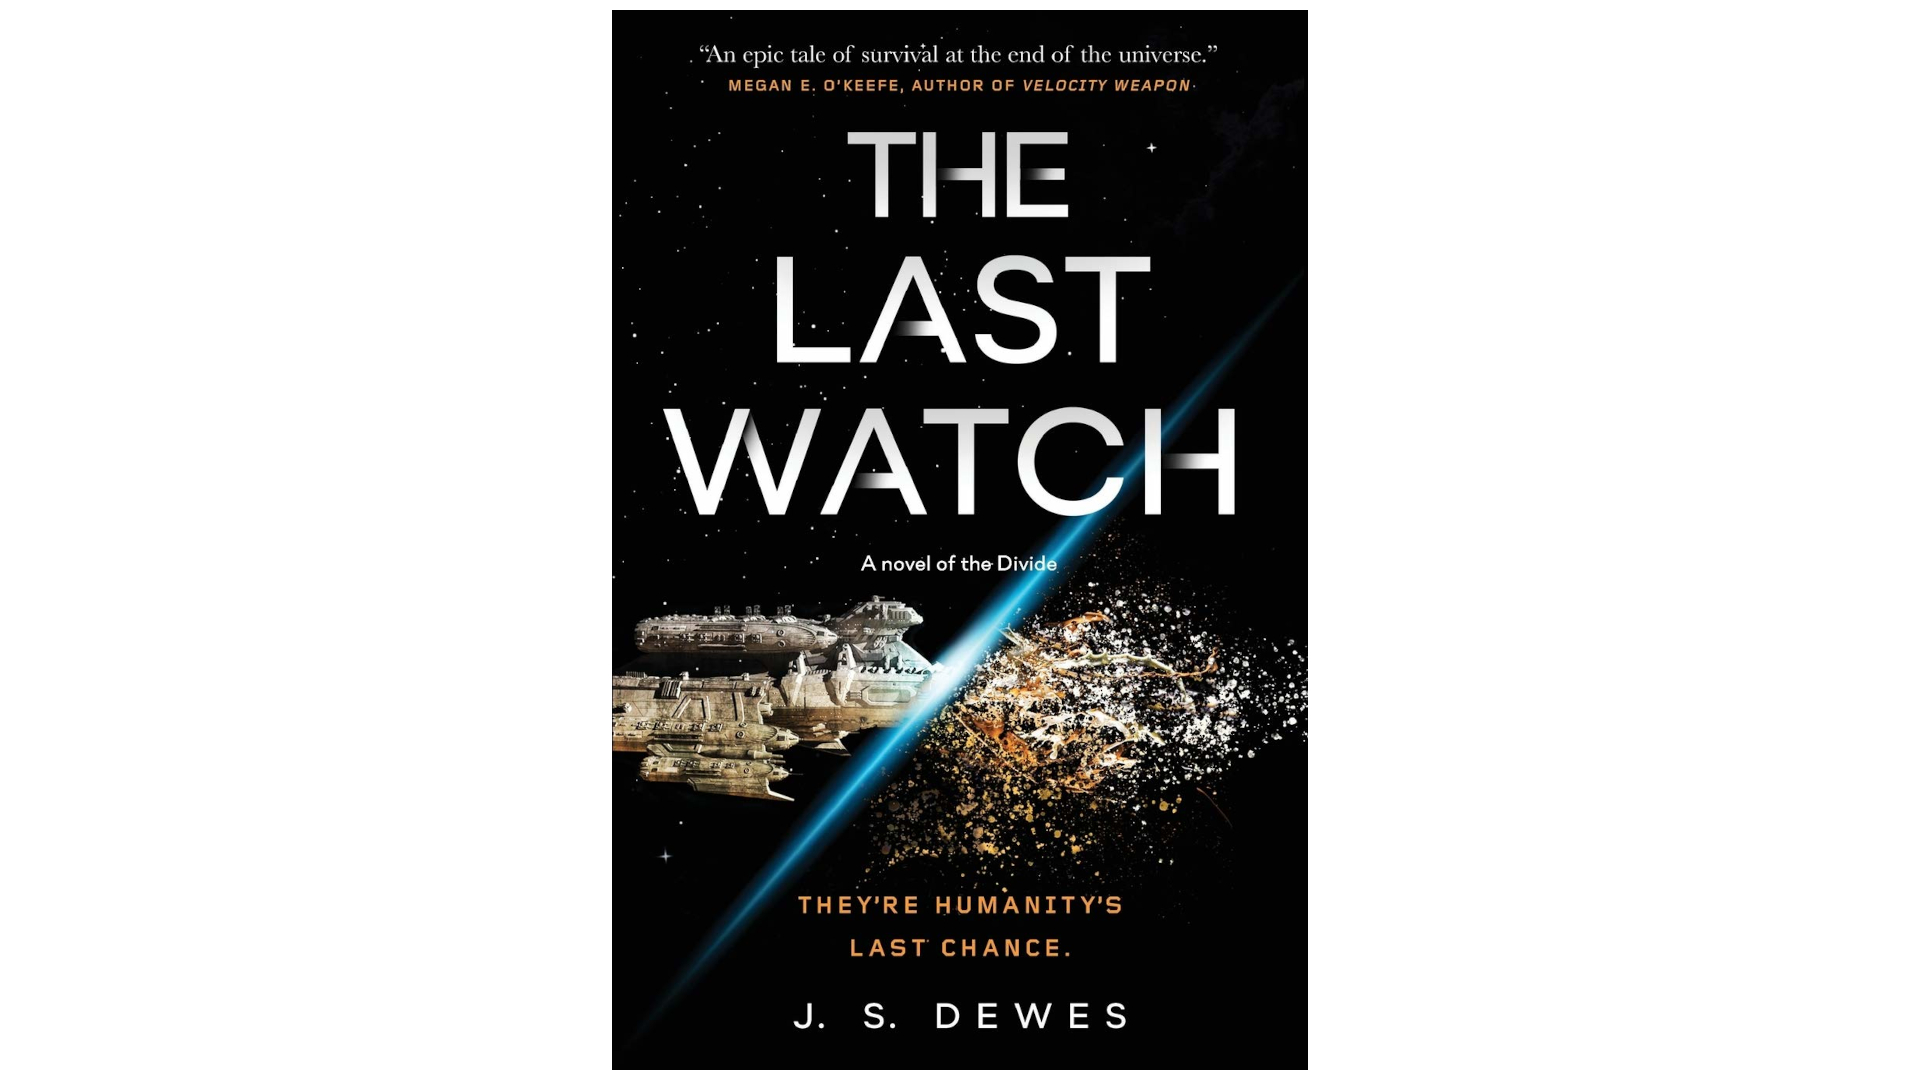 “The Last Watch” by J. S. Dewes (Tor Books, 2021)